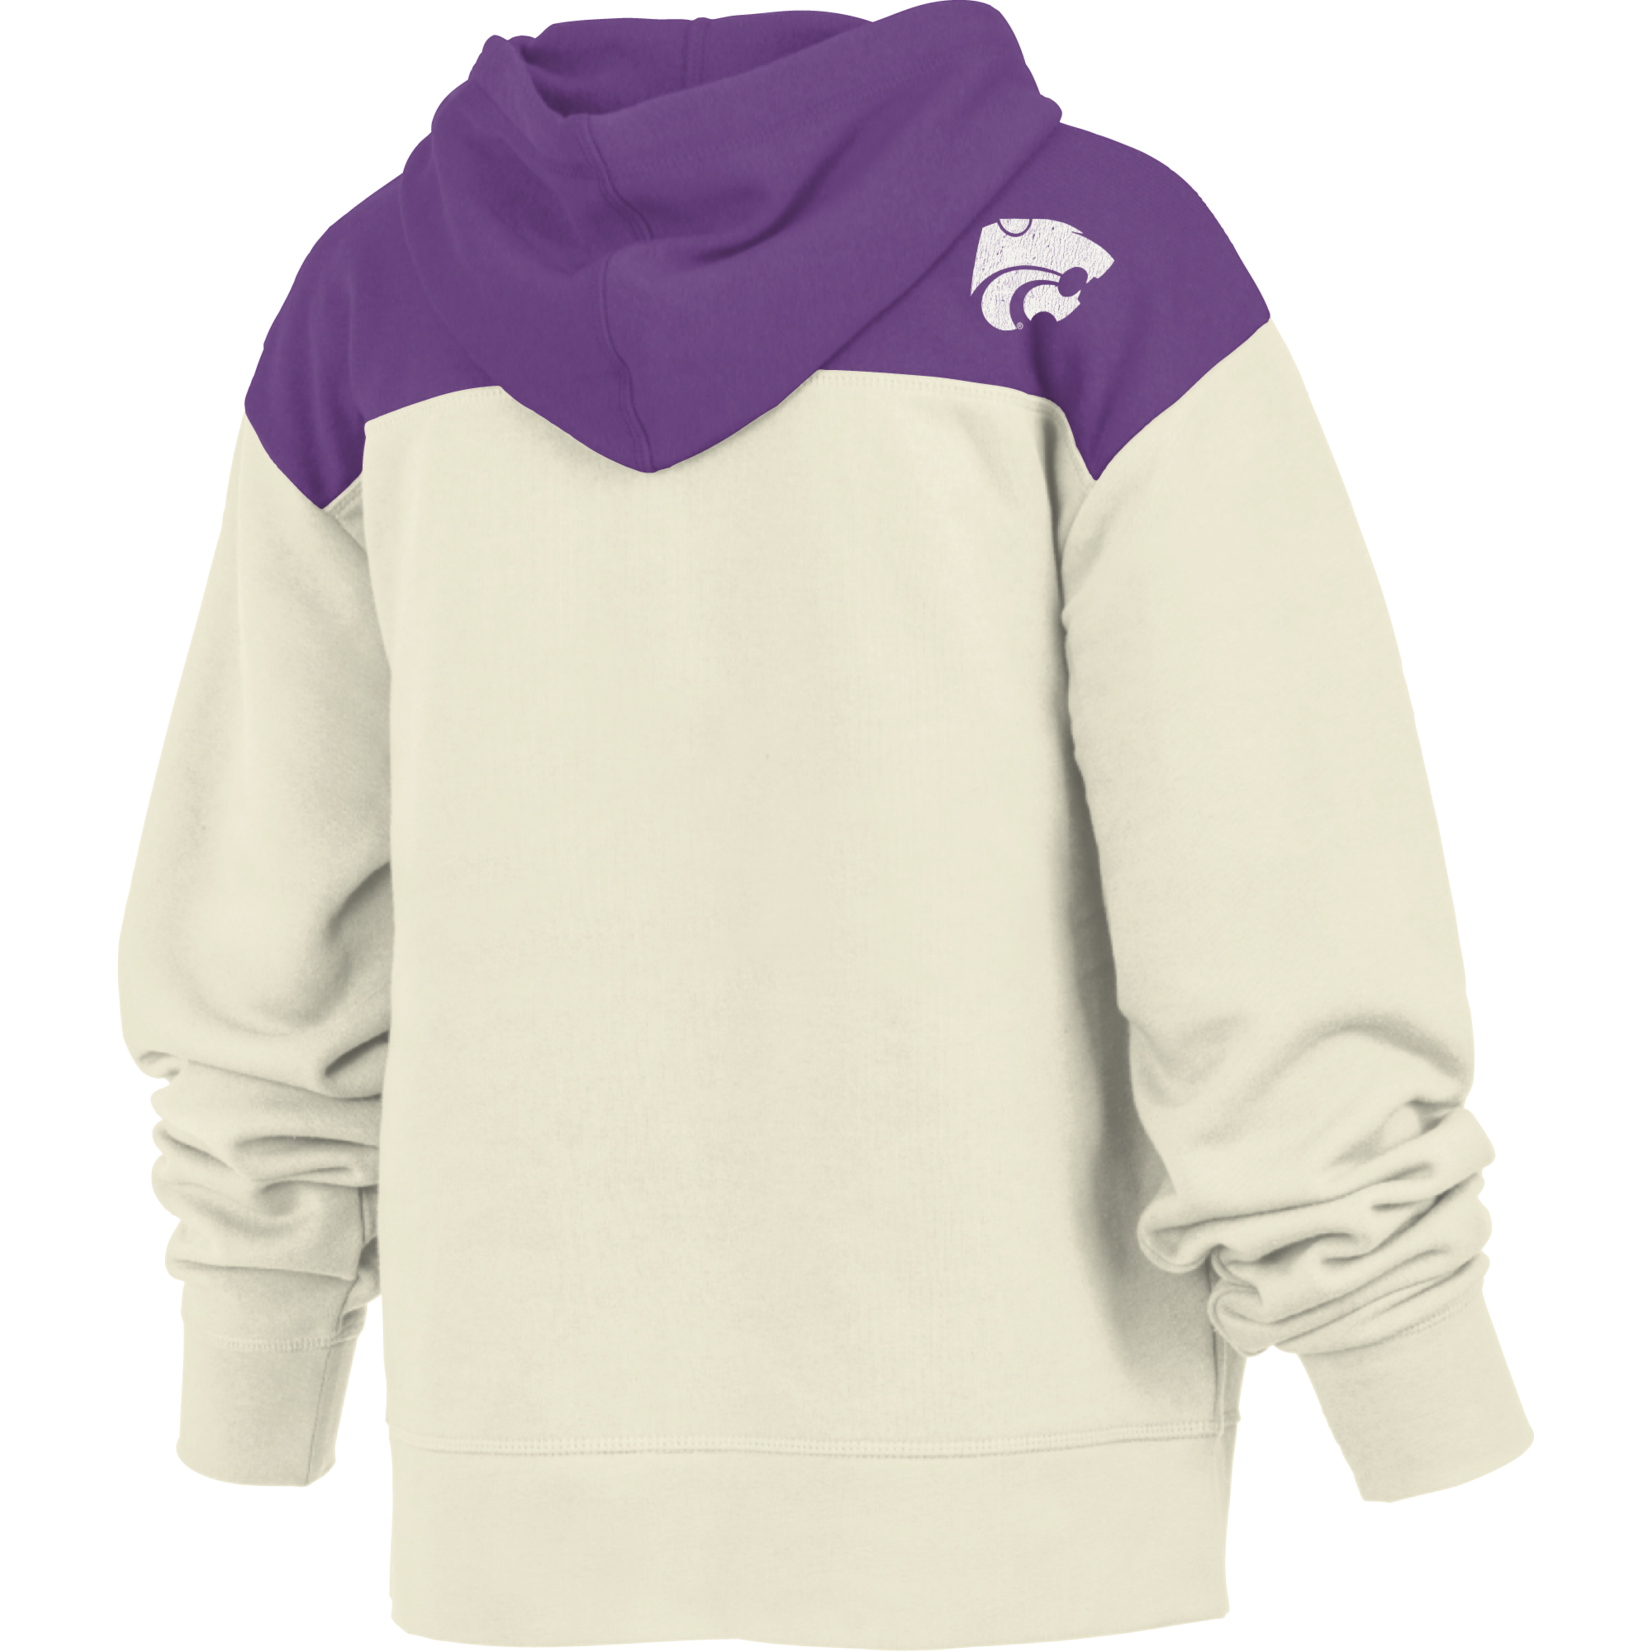 The College Hoodie